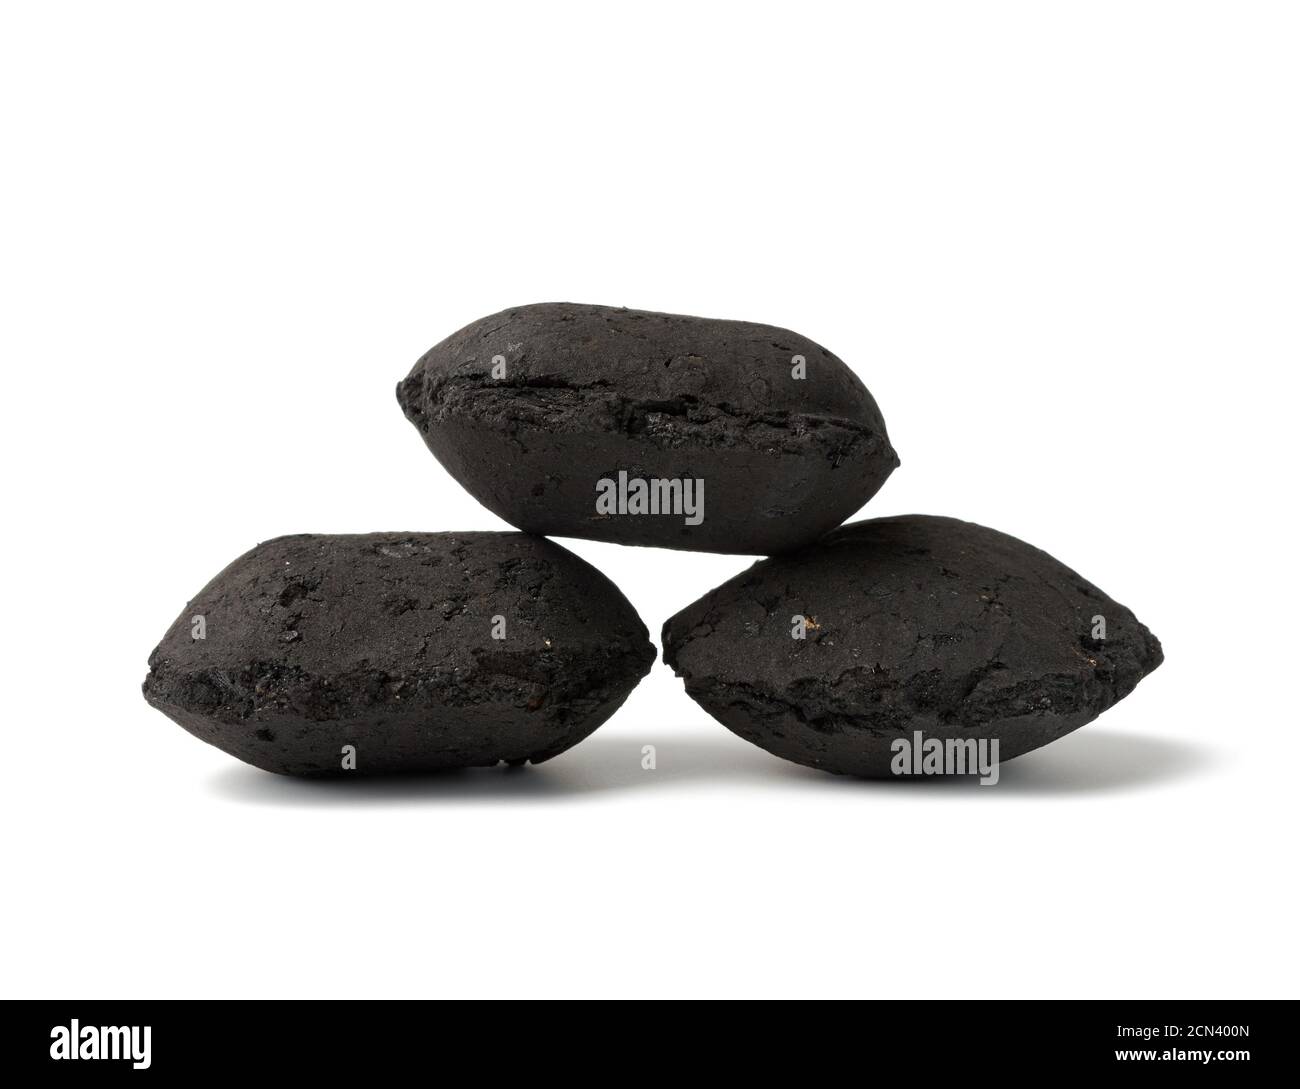 pile of black square briquettes of pressed charcoal for barbecue and bonfires Stock Photo